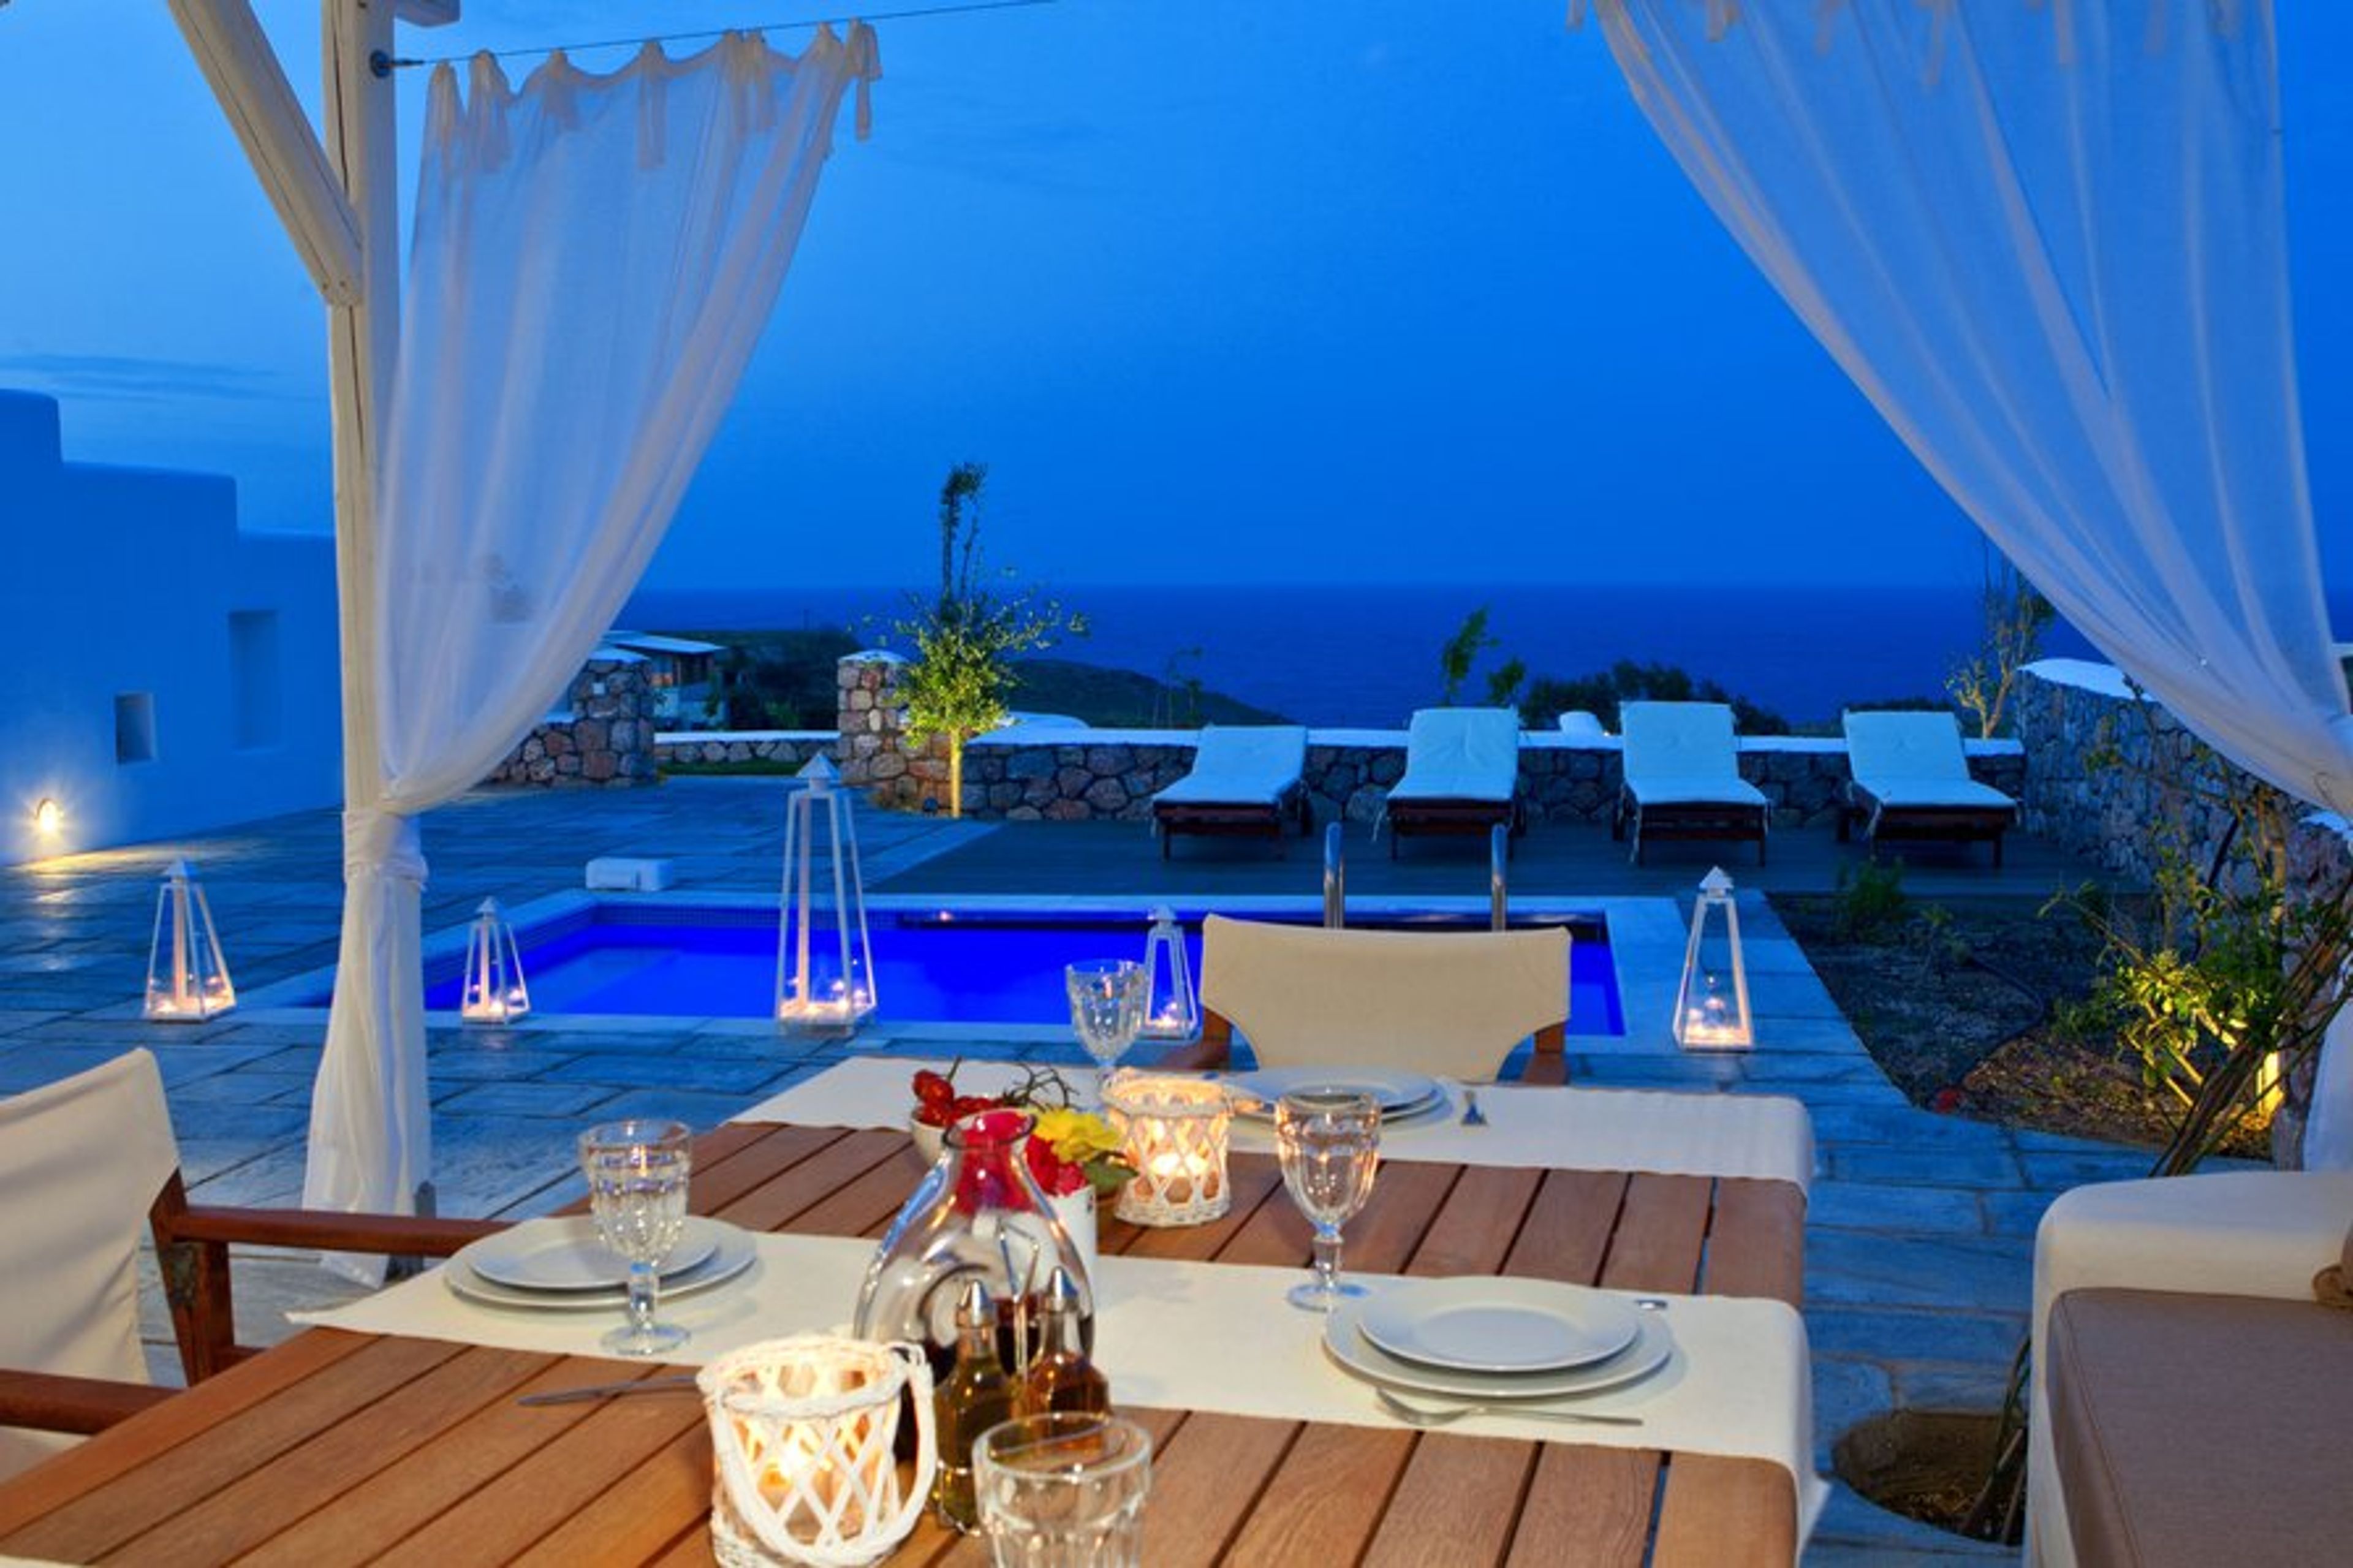 Levantes Guesthouse - Dinner by the pool